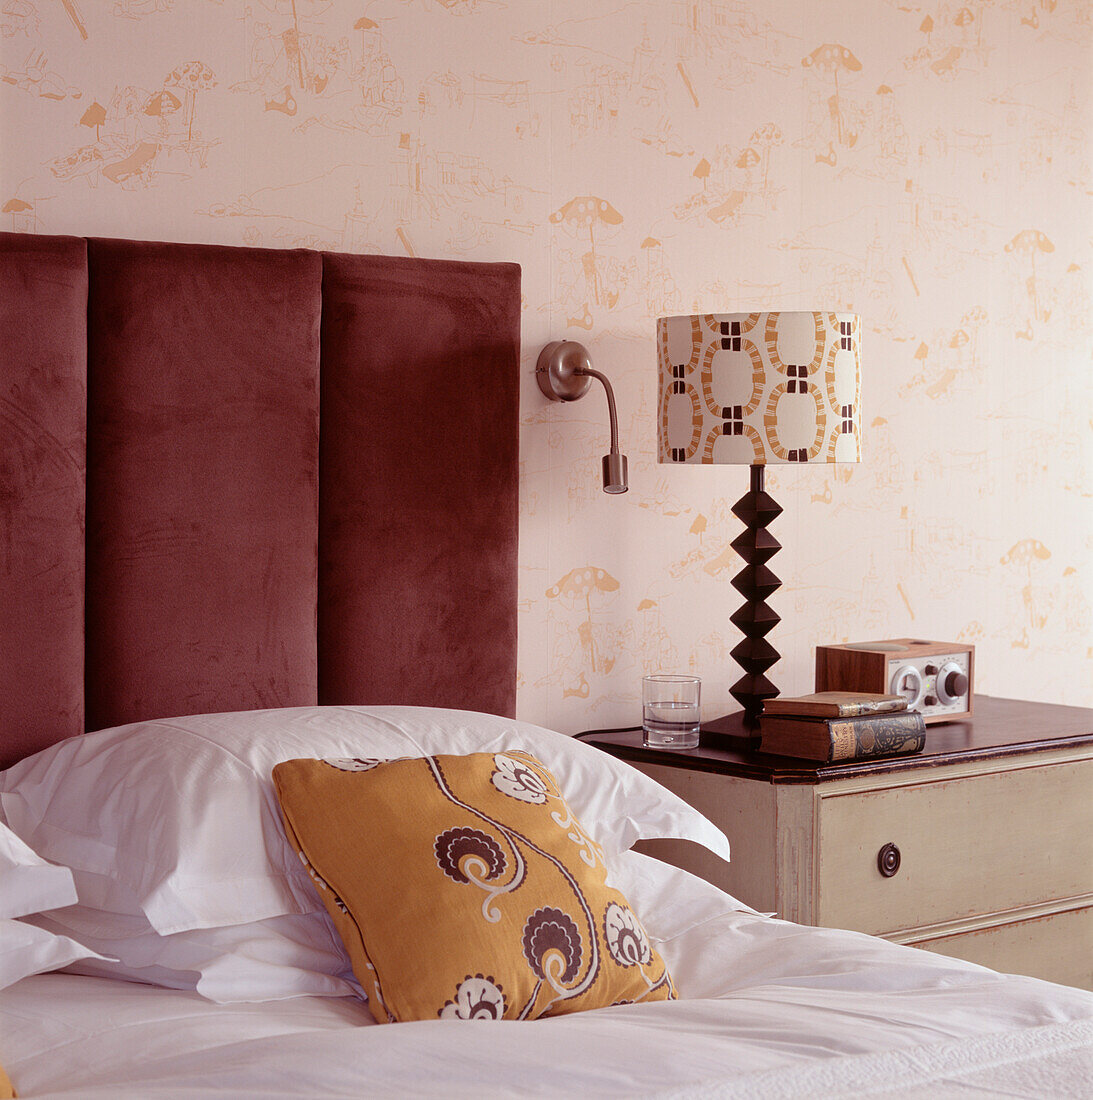 Bedroom detail with suede padded headboard and patterned furnishings